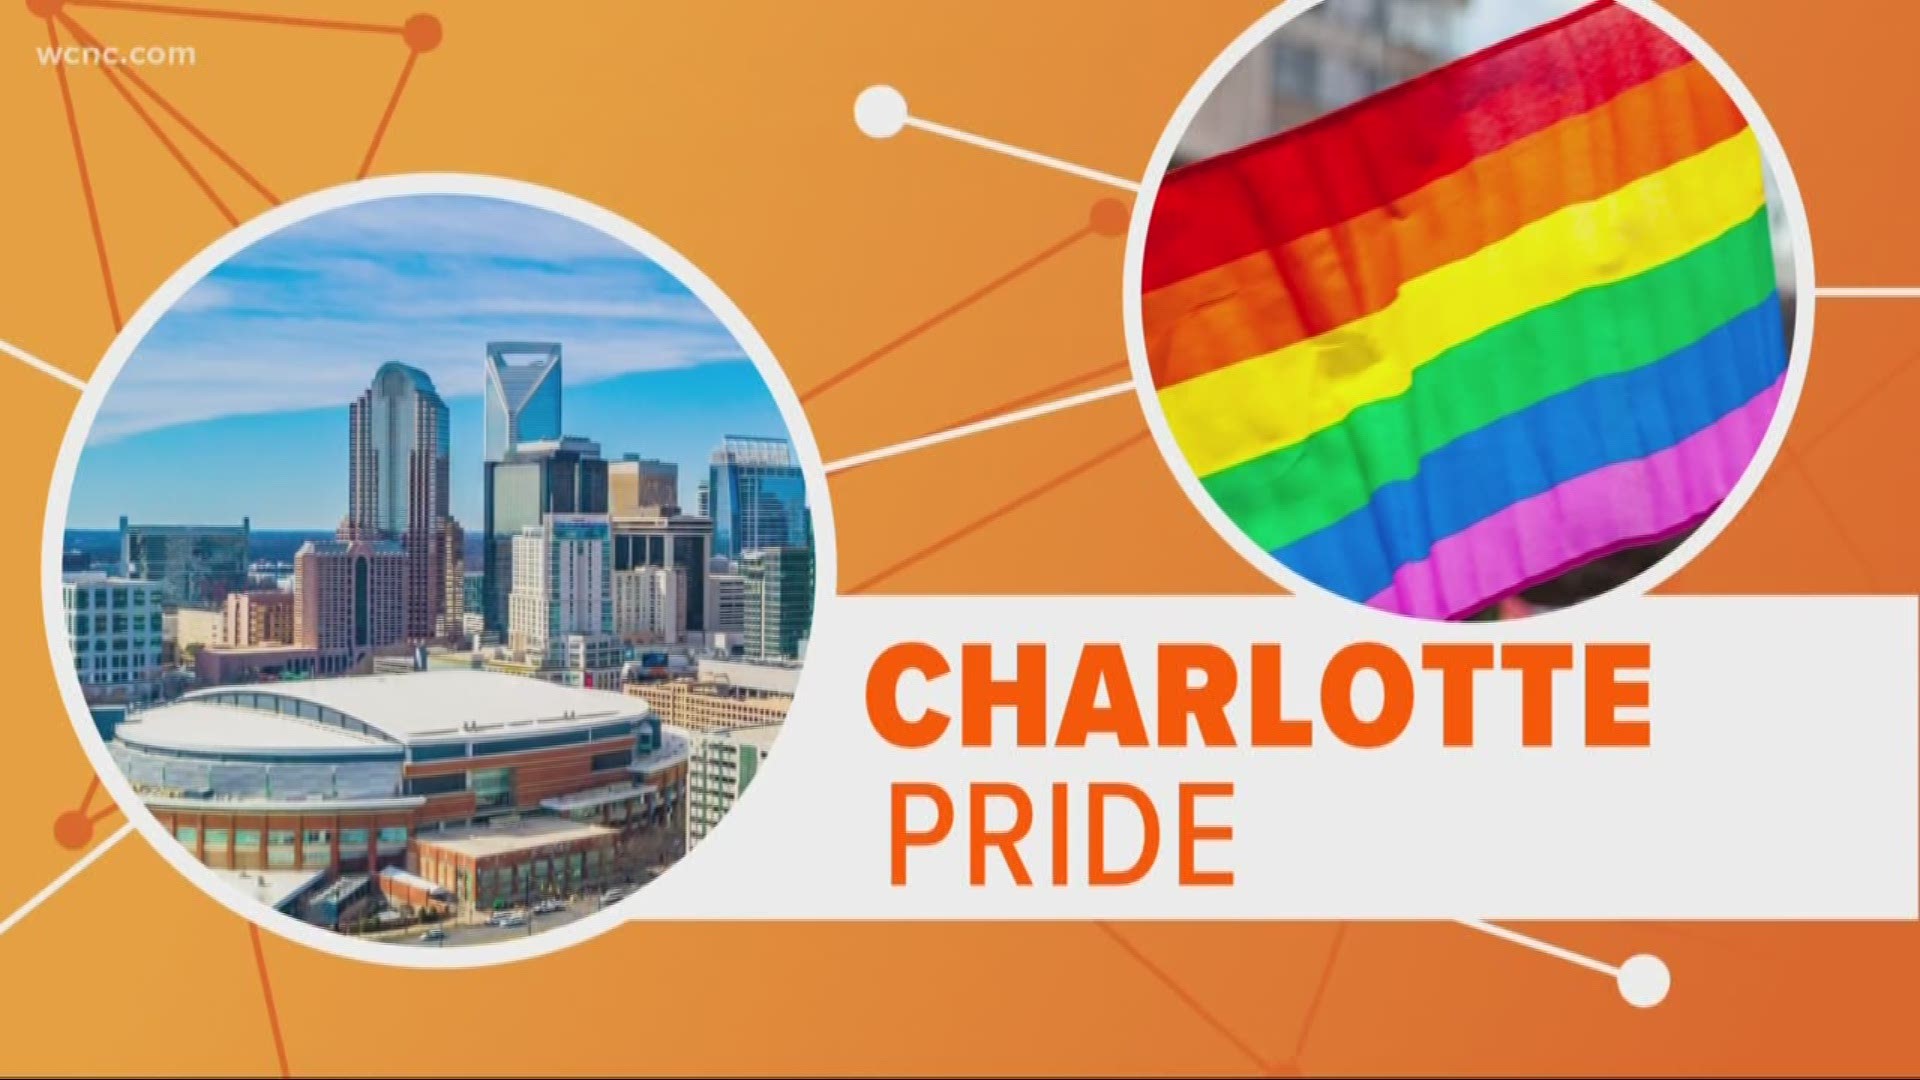 This summer marks the 50th anniversary of the modern gay rights movement. But Charlotte does things a little differently with their annual Pride festival taking place in August.